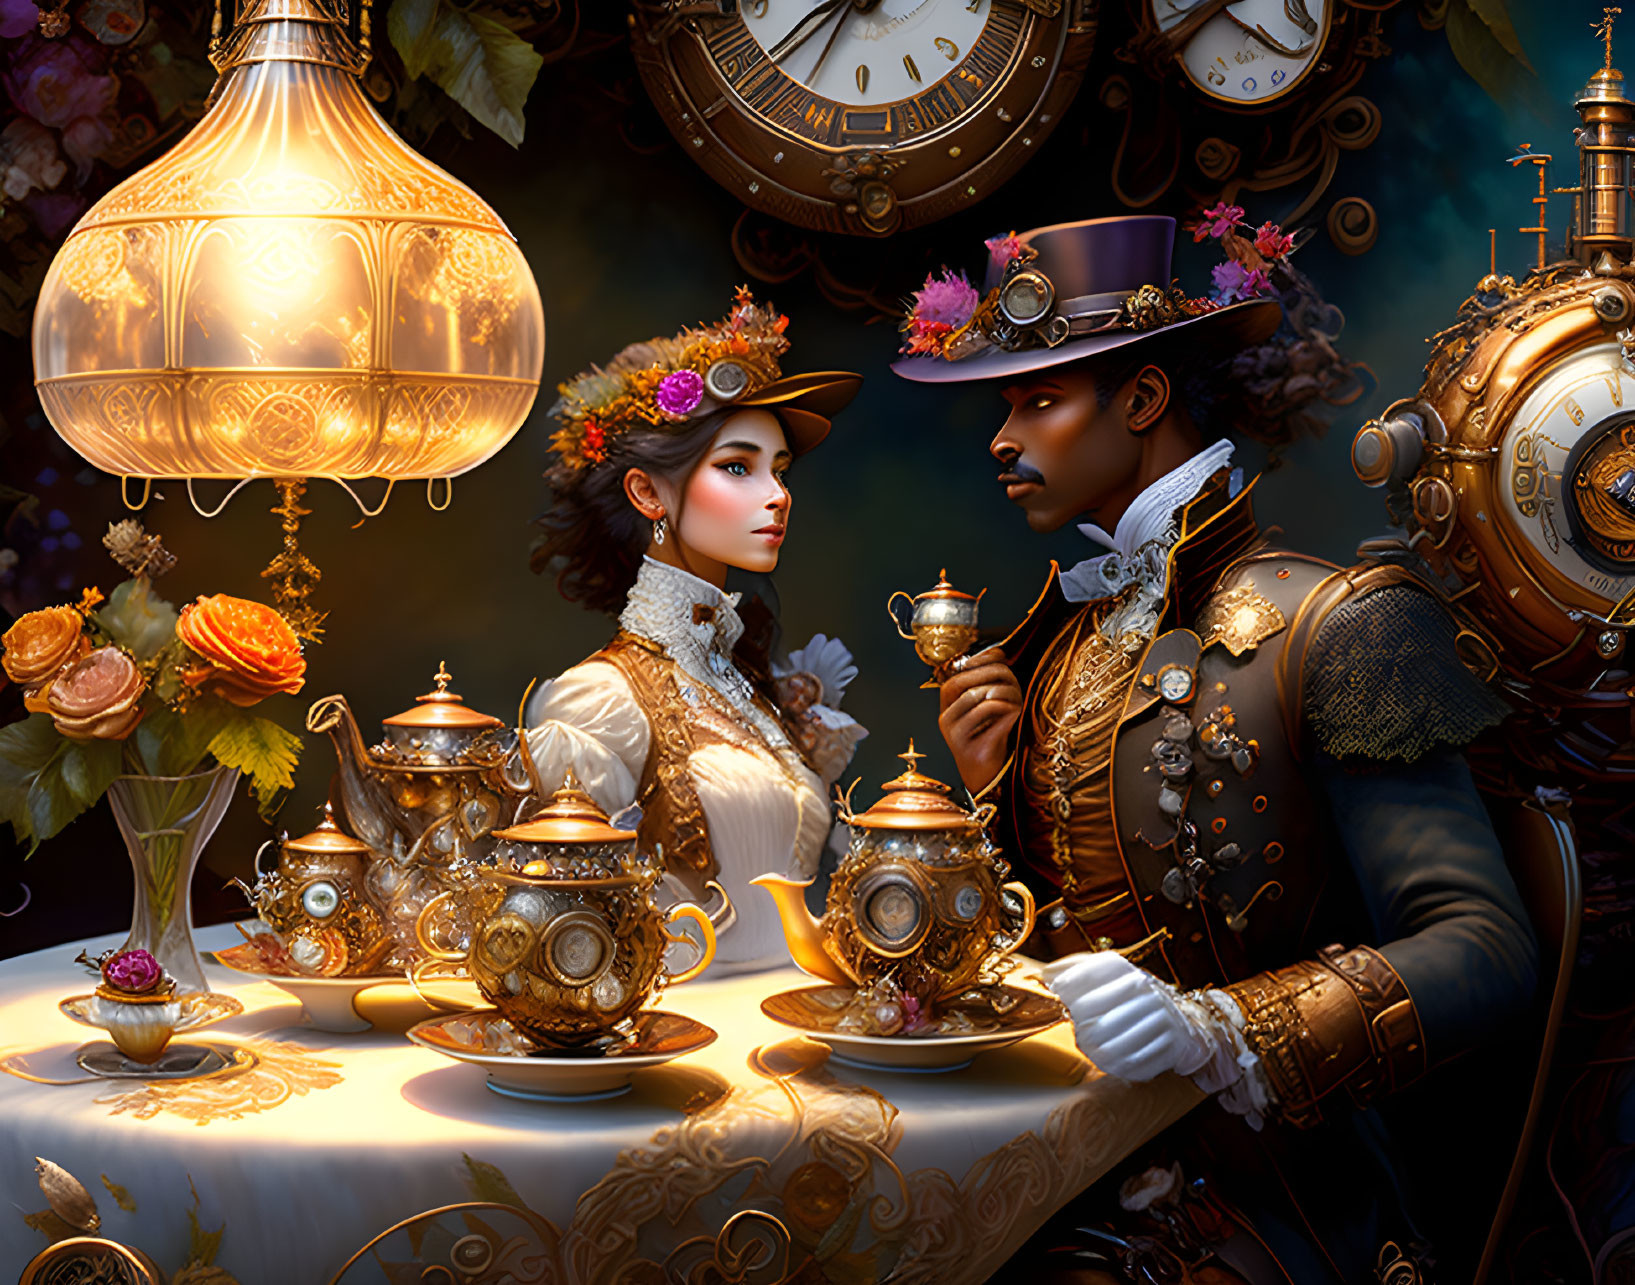 Victorian-style couple in steampunk attire tea party with gold tea set